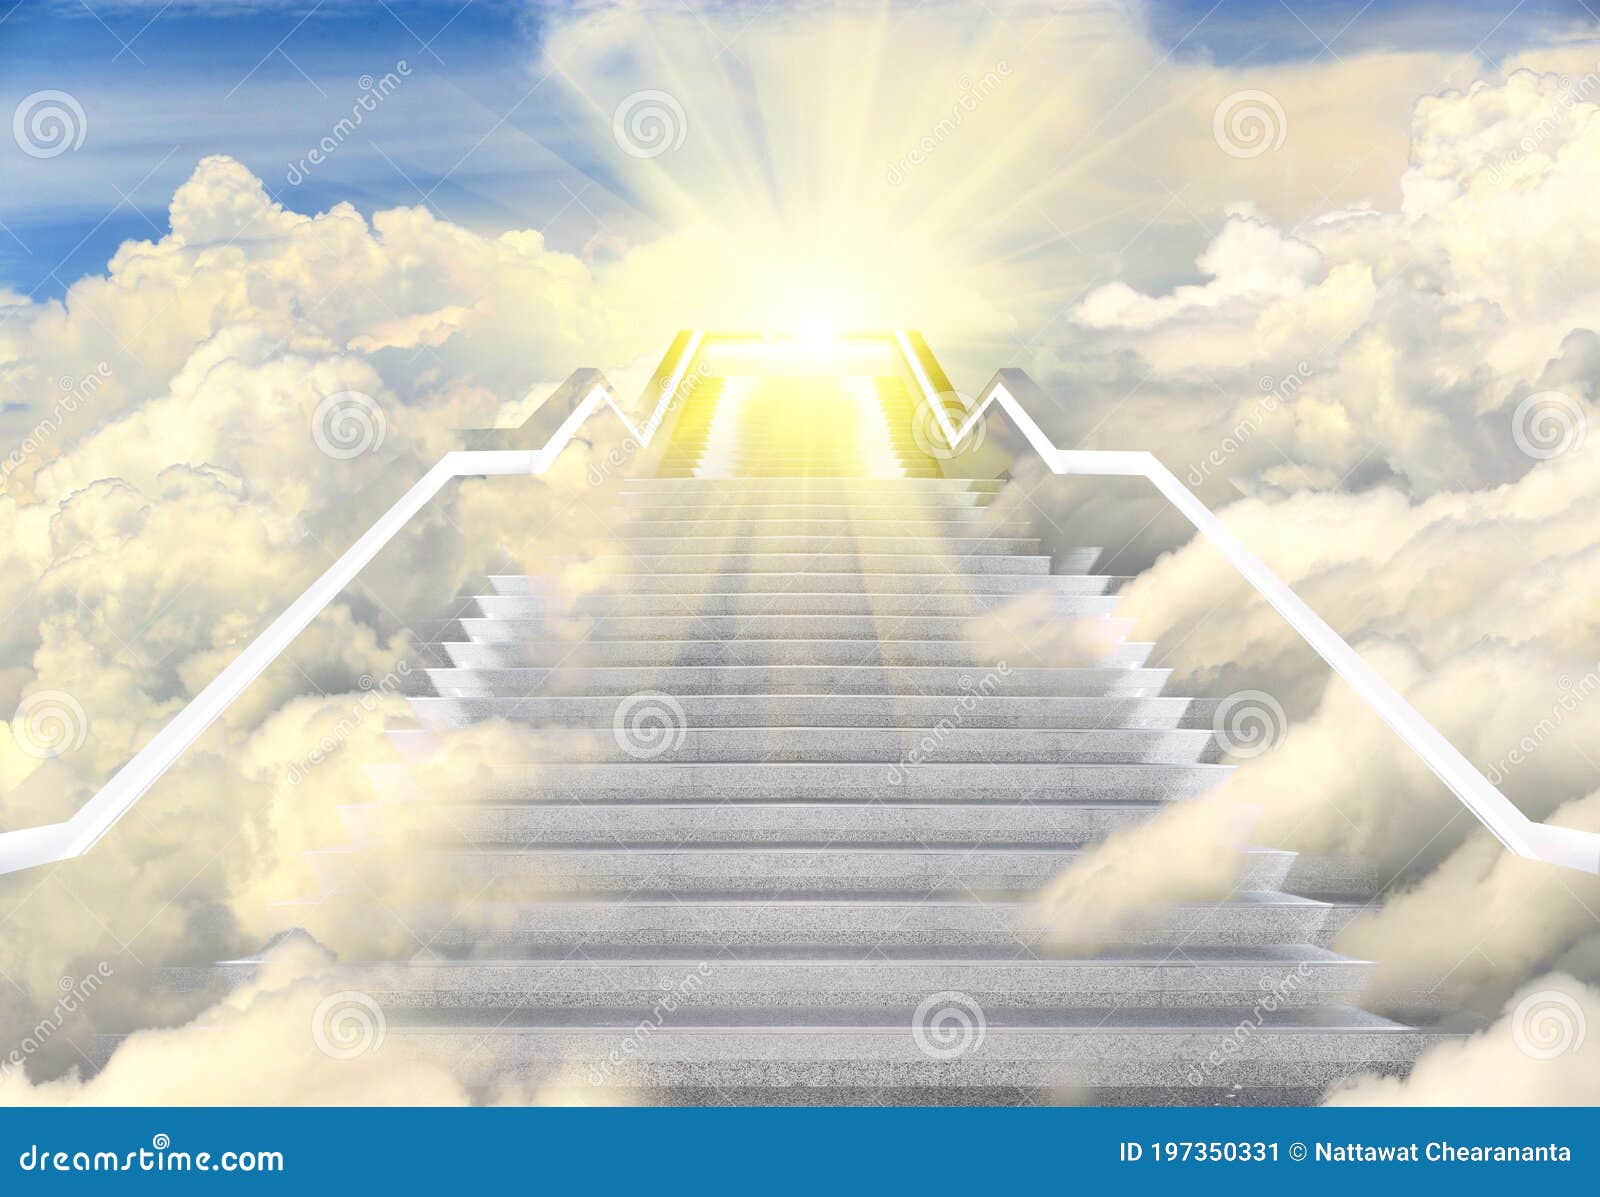 long staircase high way to heaven, empty stair steps along cloud in sky